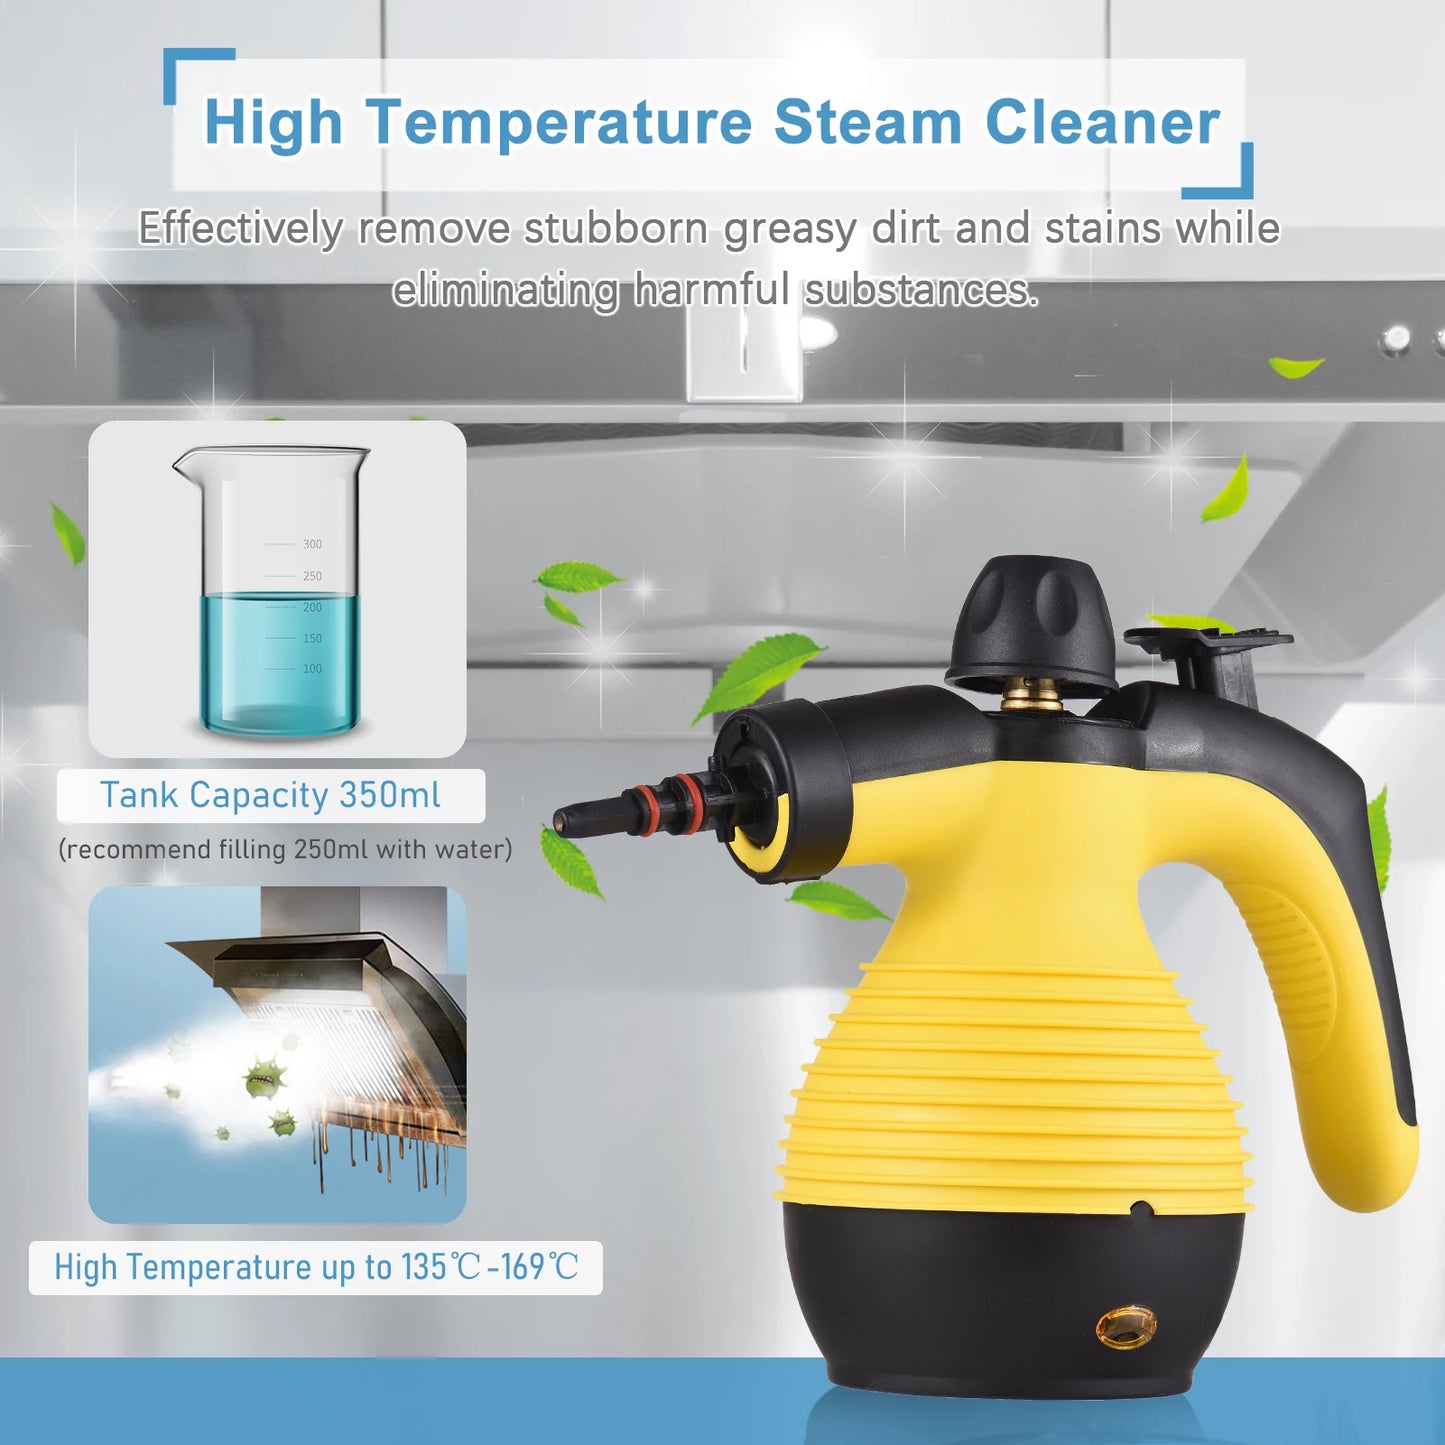 Handheld Steam Cleaner for Home 1050W High Temperature Pressurized Steam Cleaning Machine with 9PCS Accessory Steamers. 

Handheld Steam Cleaner 1050W High Temp Machine with 9PCS Accessory Steamers